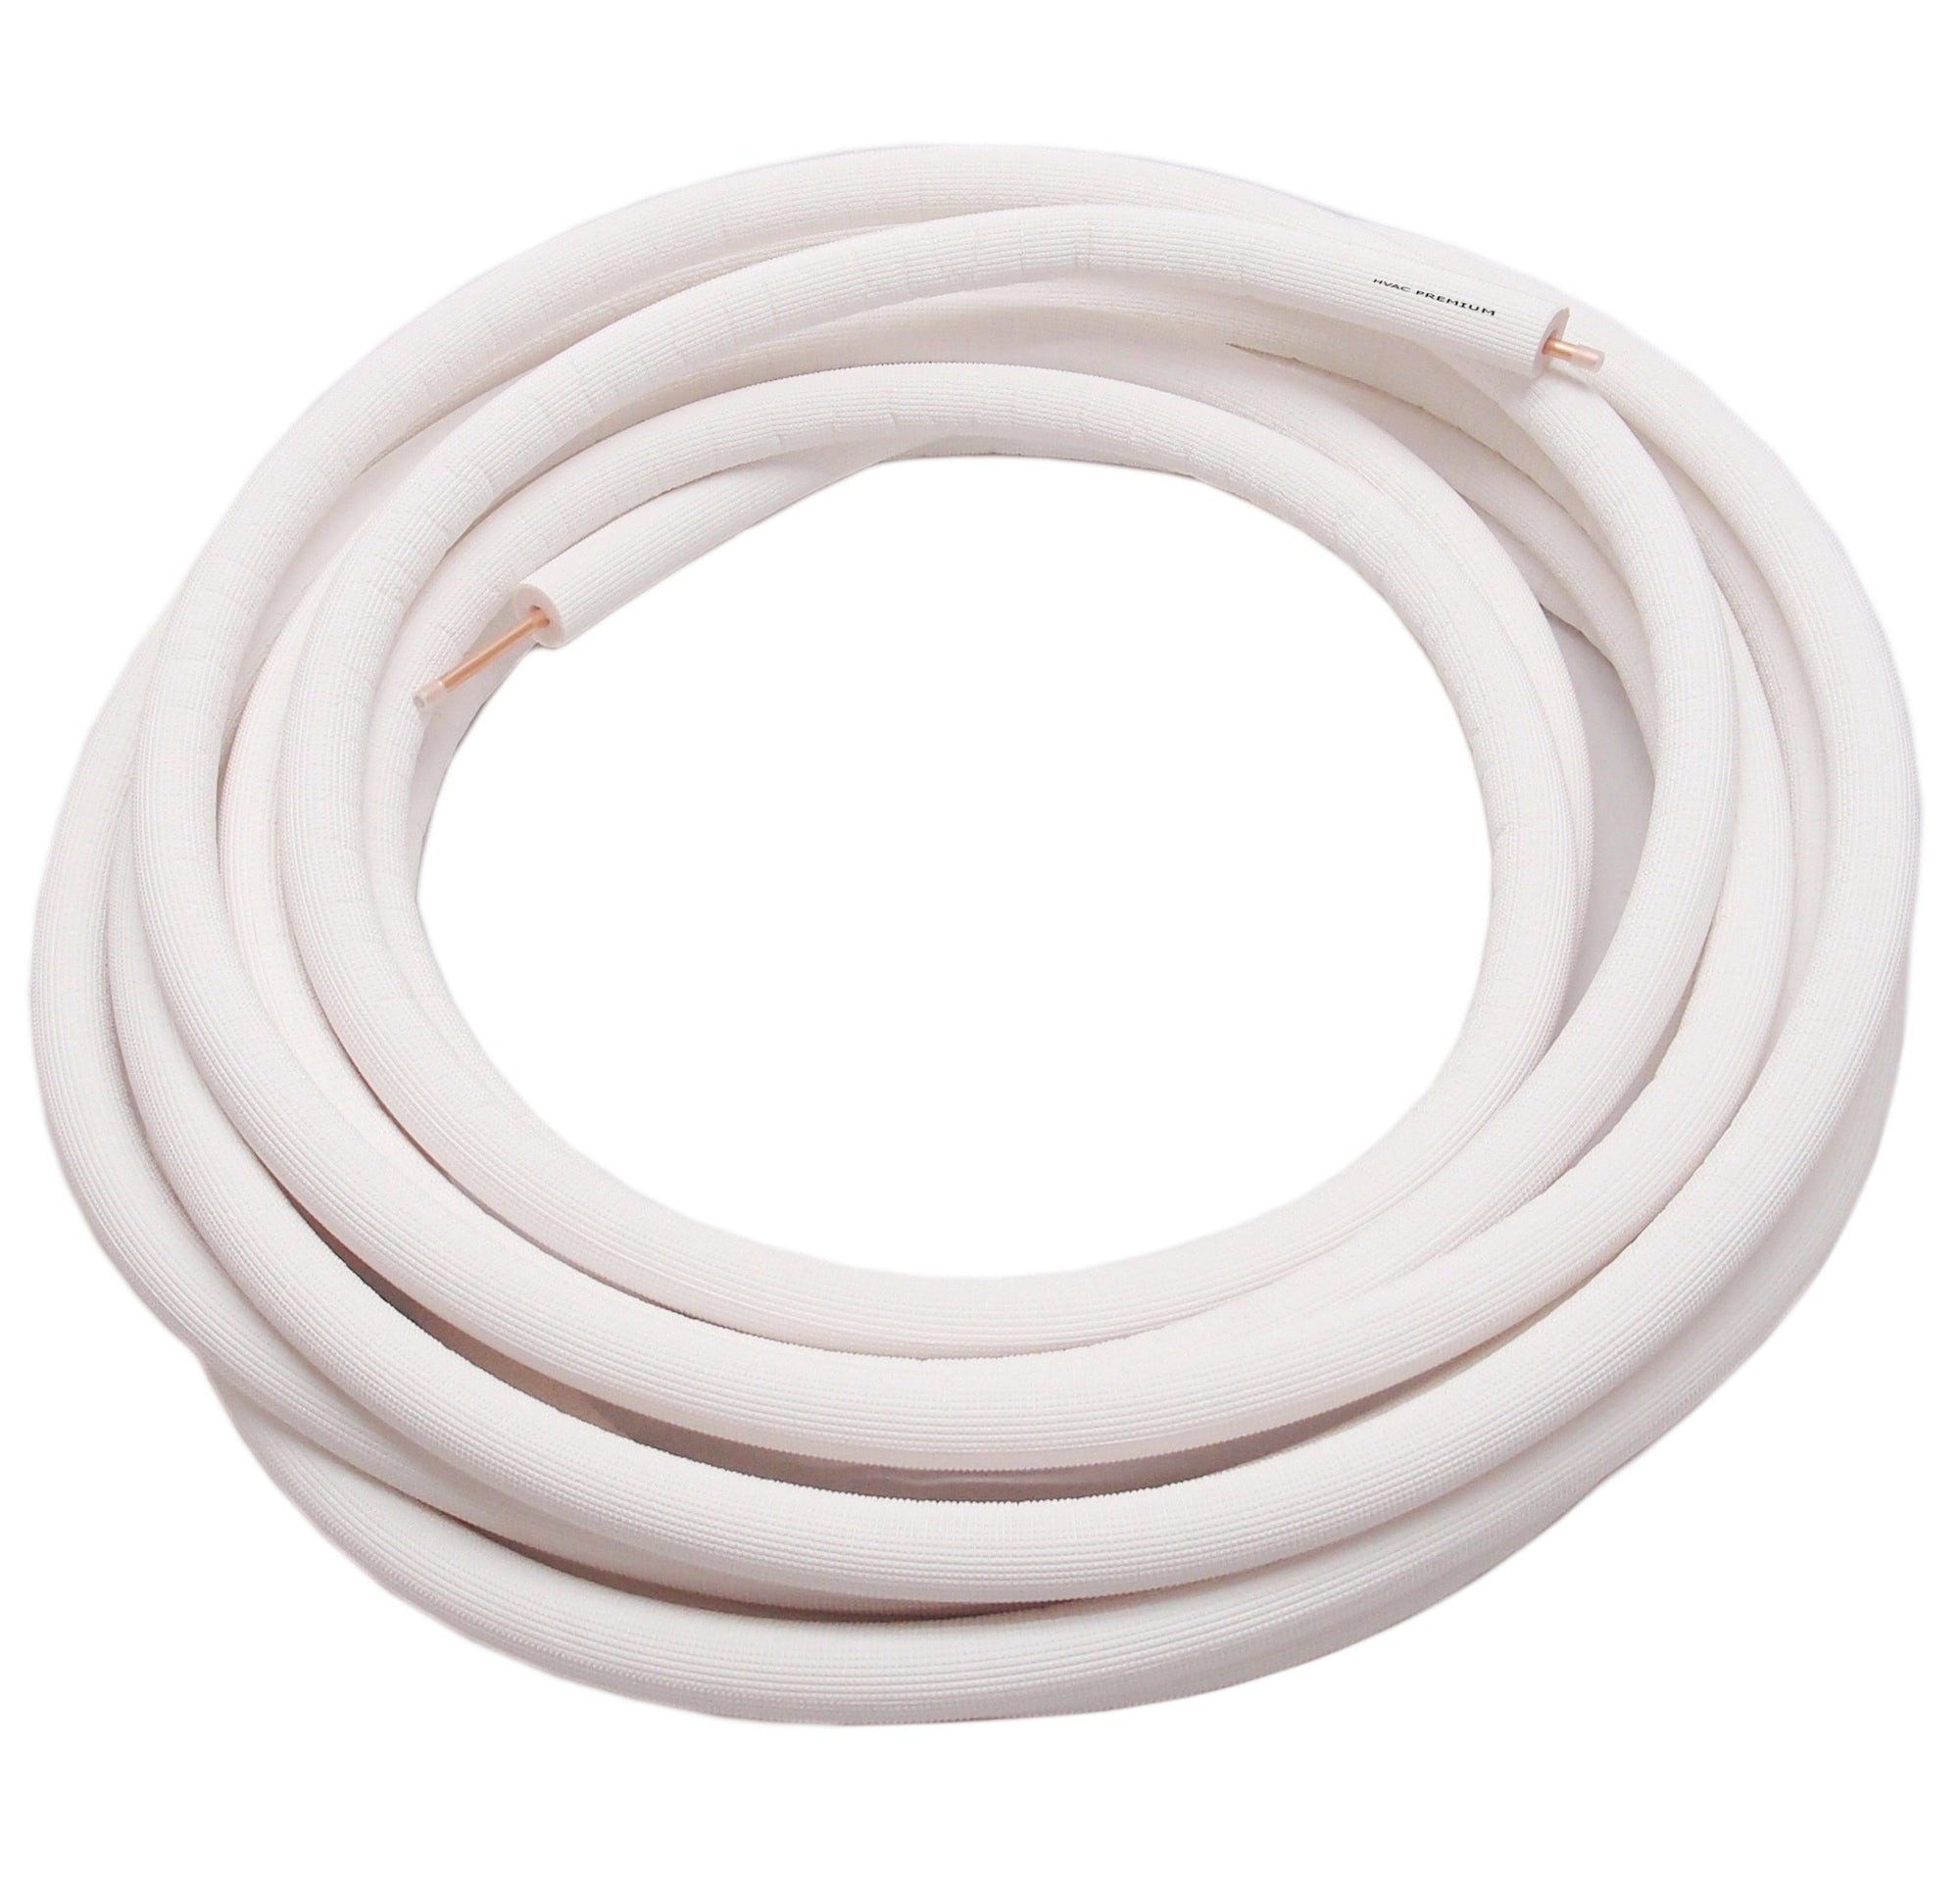 5/8" Insulated Copper Coil Line - Seamless Pipe Tube for HVAC, Refrigerant - 1/2" White Insulation - 35' Long